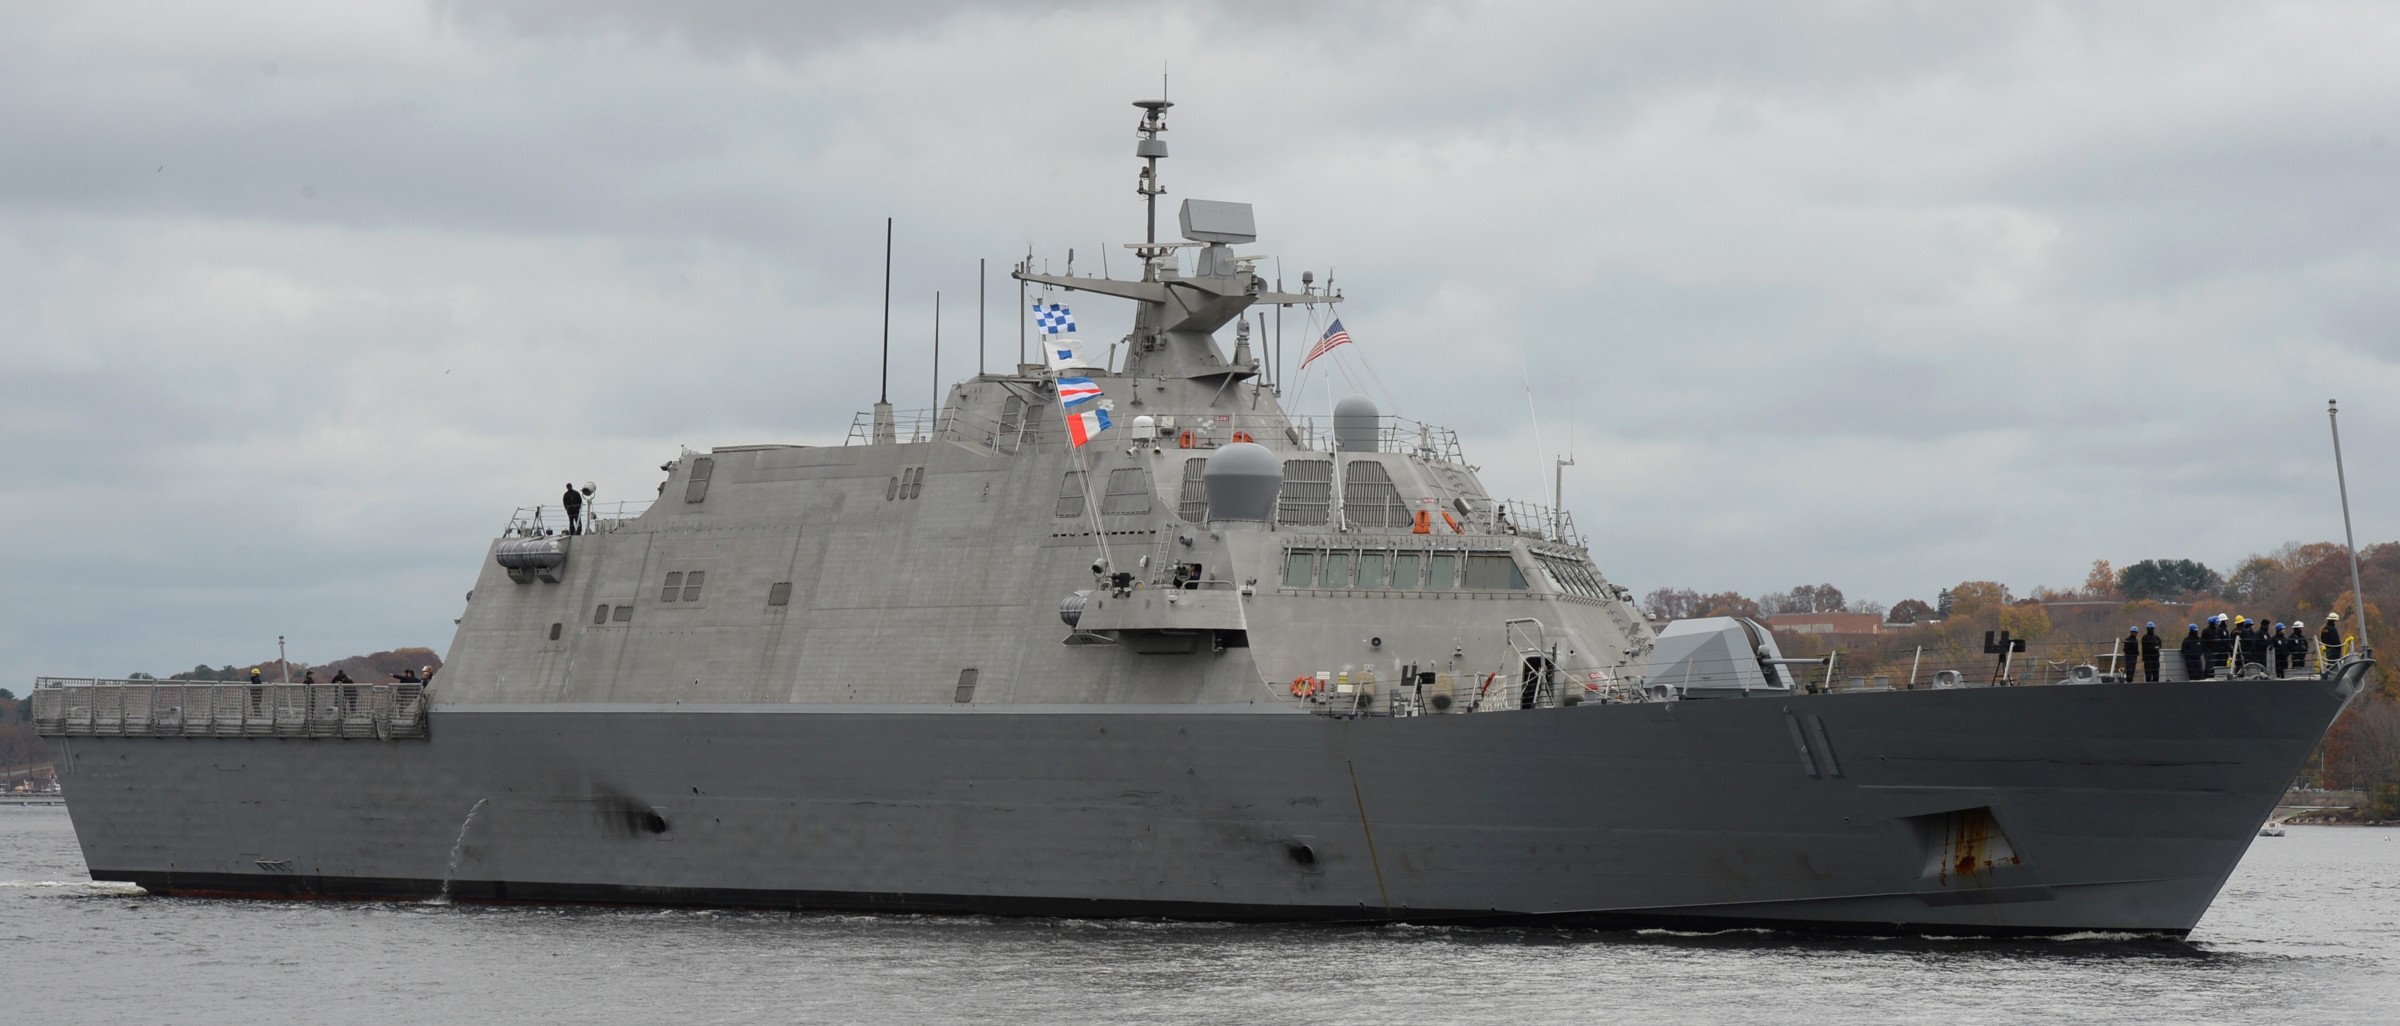 lcs-11 uss sioux city freedom class littoral combat ship us navy 26 naval submarine base new london groton